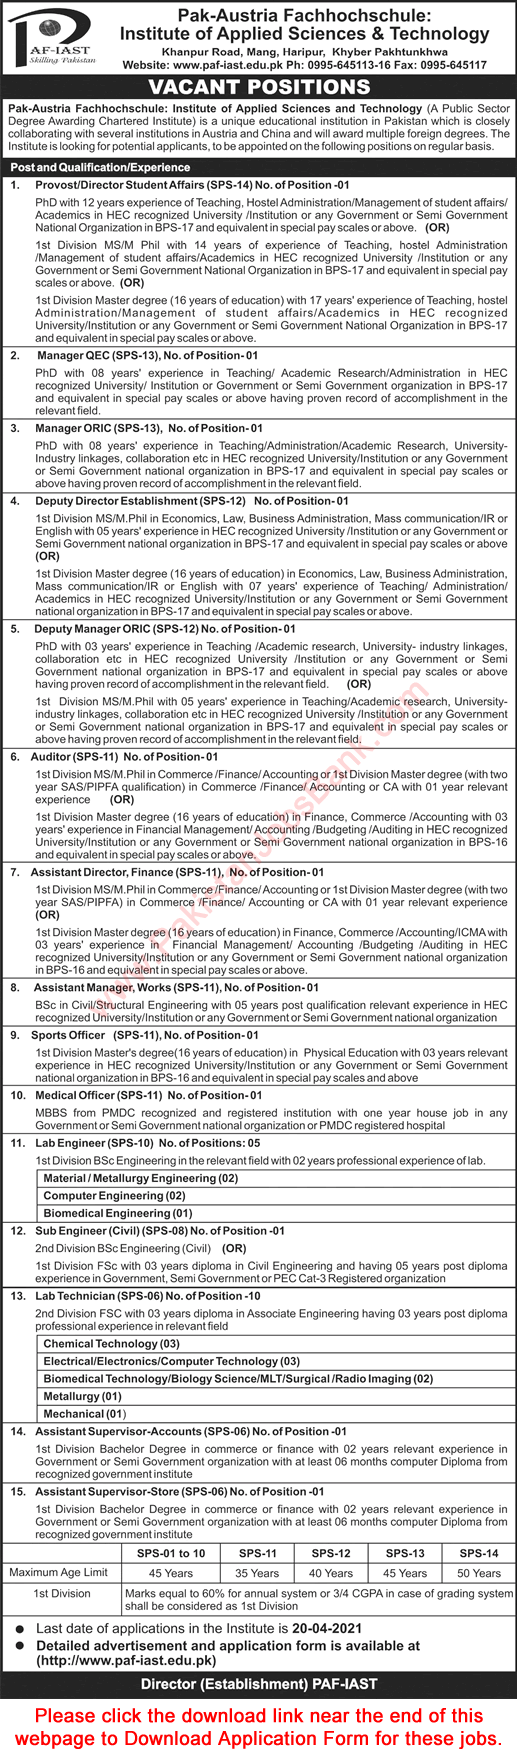 PAF IAST Haripur Jobs 2021 March Application Form Pak-Austria Fachhochschule Institute of Applied Sciences and Technology Latest